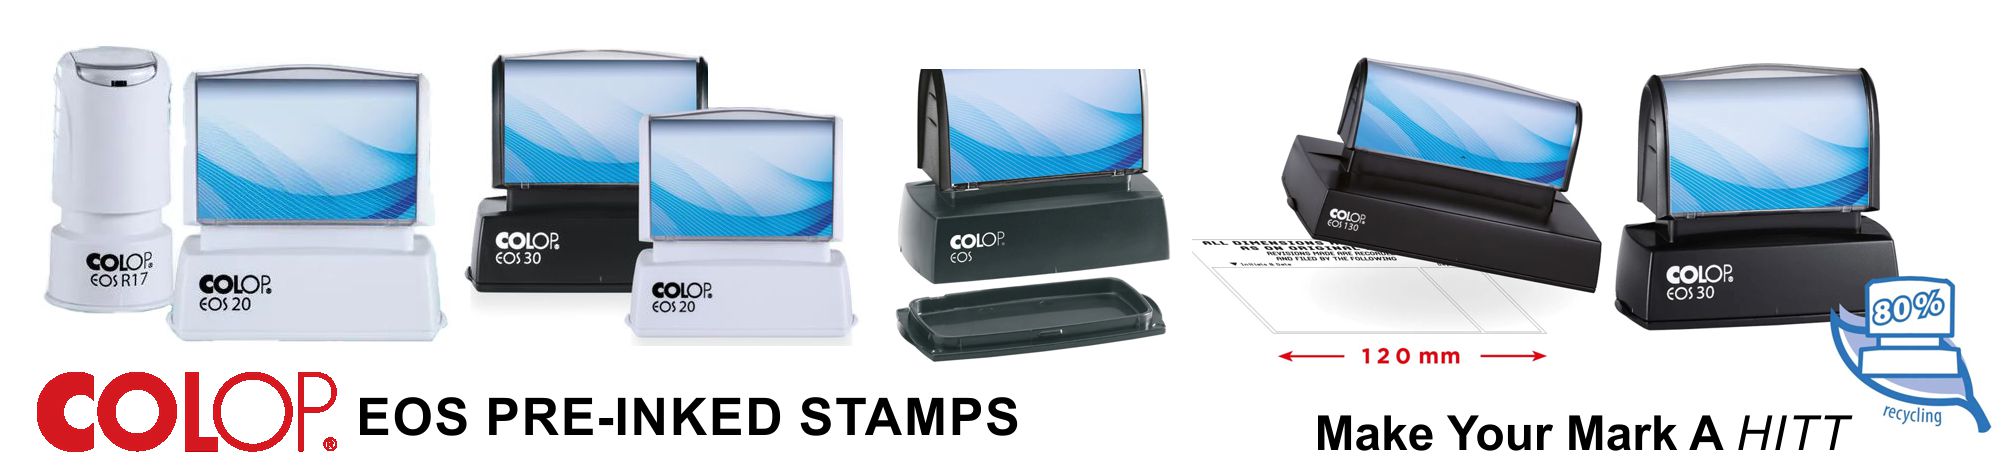 COLOP EOS Pre-Inked Stamps